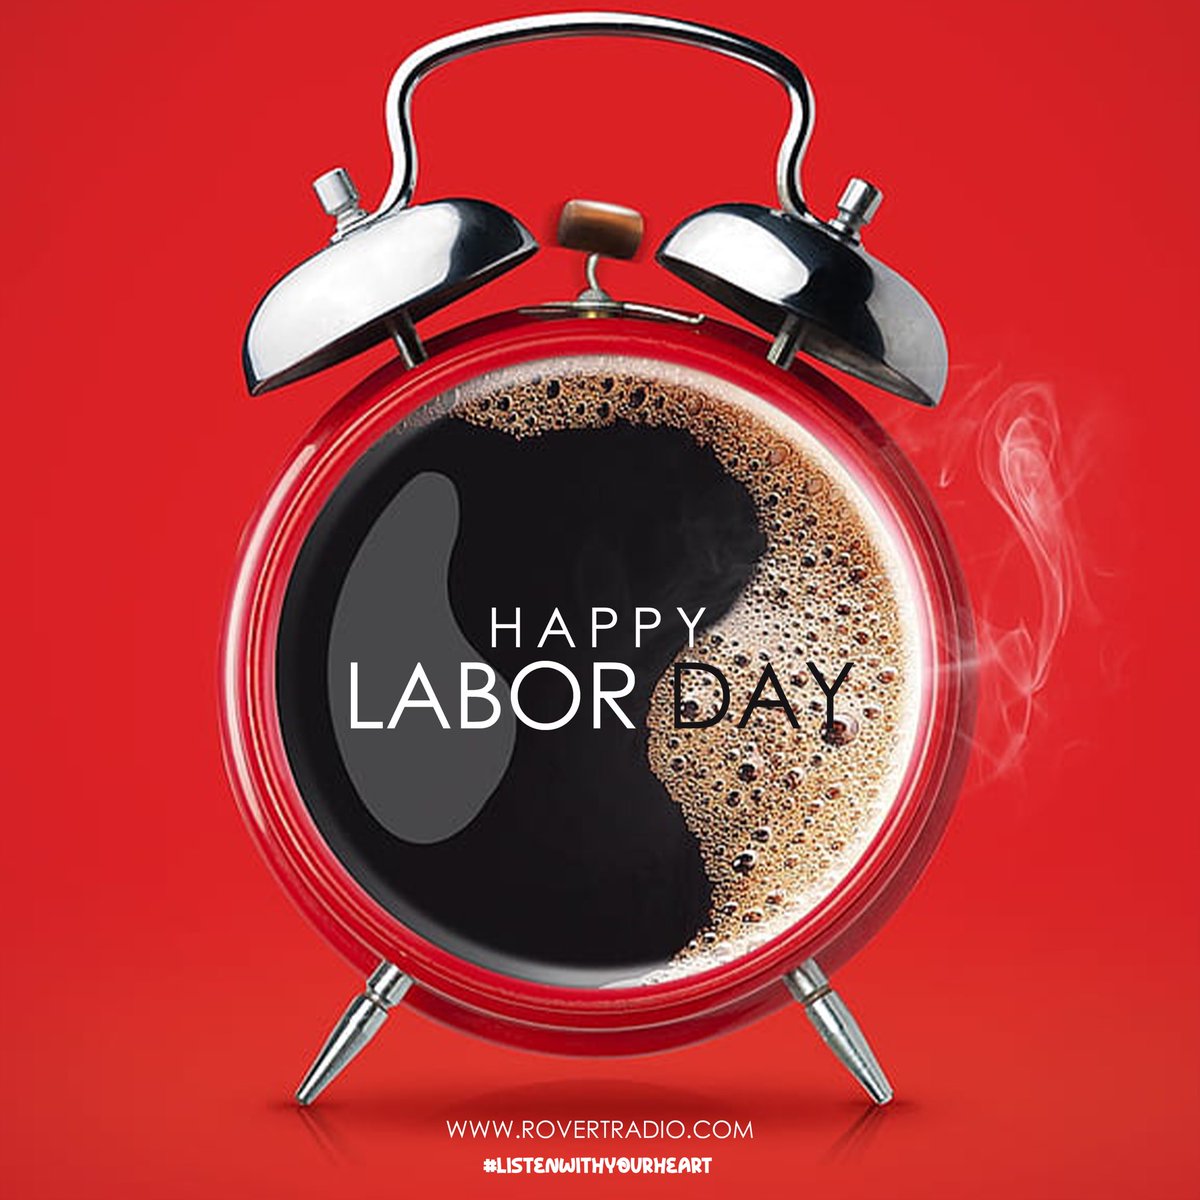 Today, we salute the backbone of our society—workers. Happy Labor Day from #Rovertradio!

#Listenwithyourheart #Rovertradio #internetradio #HappyLaborDay